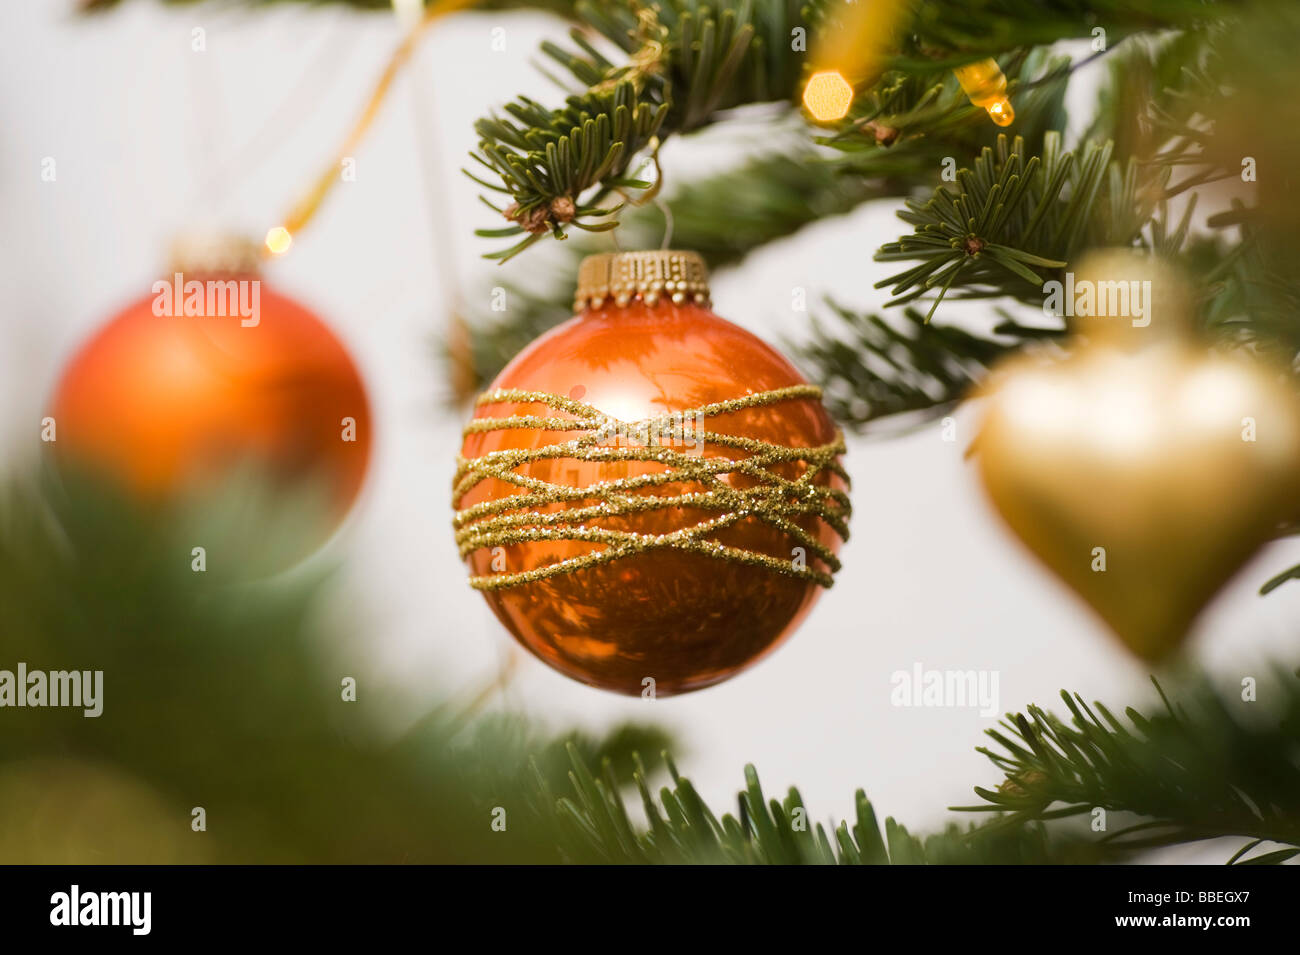 Close-up of Christmas Ornaments on Christmas Tree Stock Photo